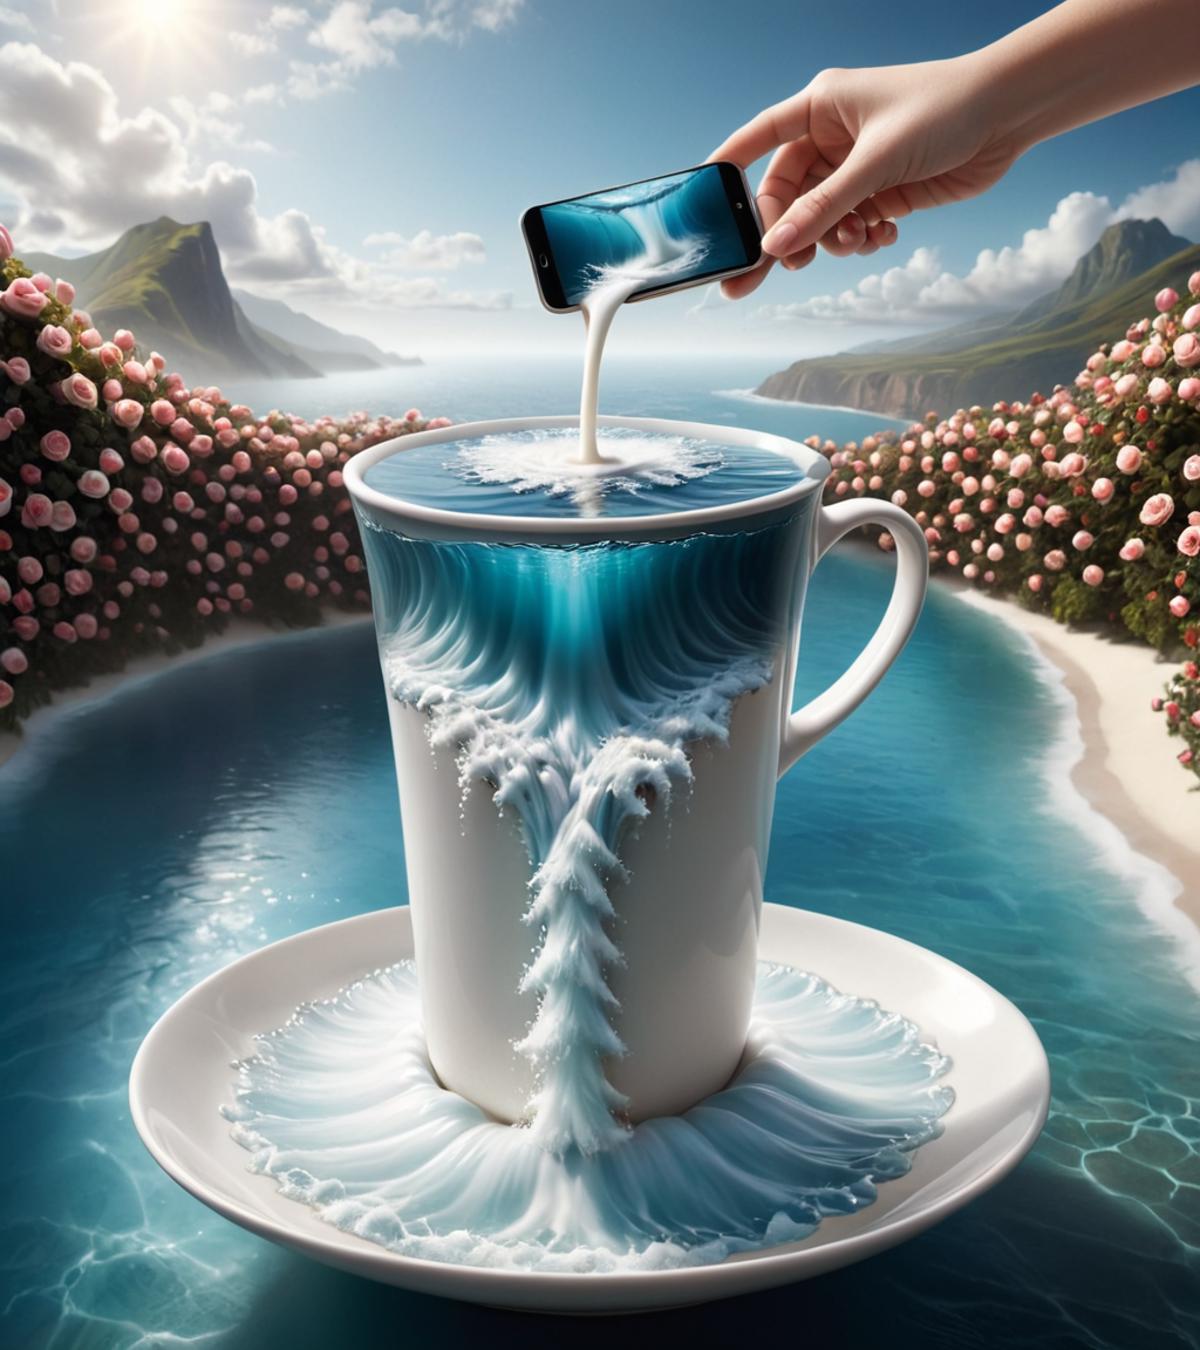 A creative coffee advertisement with a cell phone pouring milk into a coffee cup.